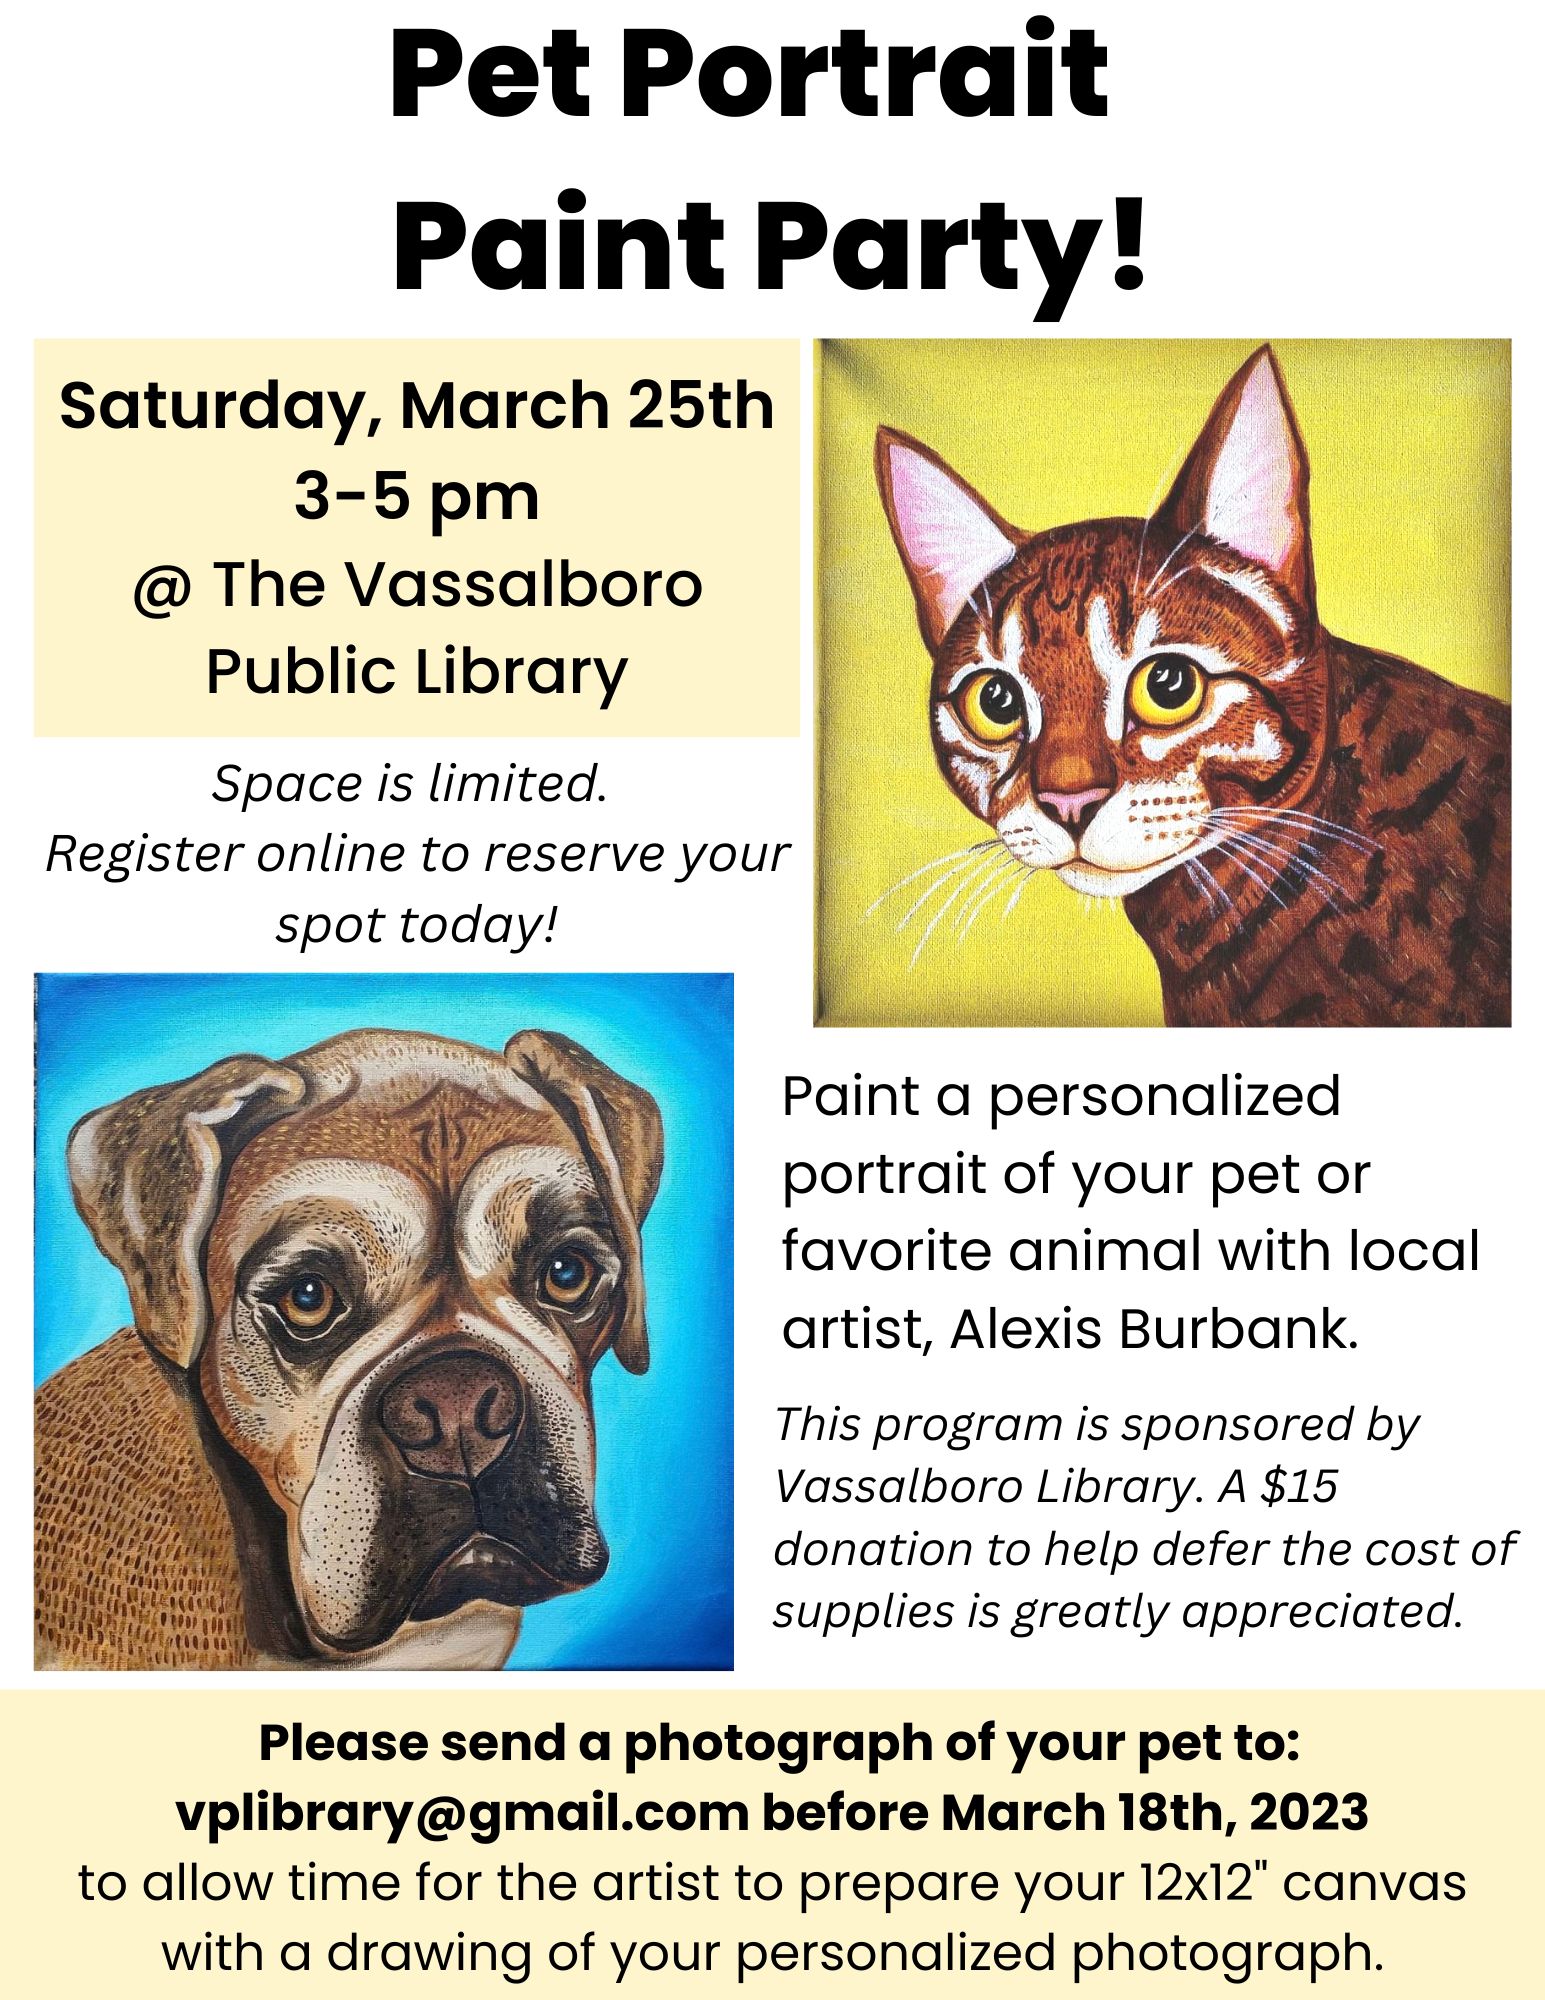 Pet Portrait Paint Party at Vassalboro Library on March 25 from 3-5pm